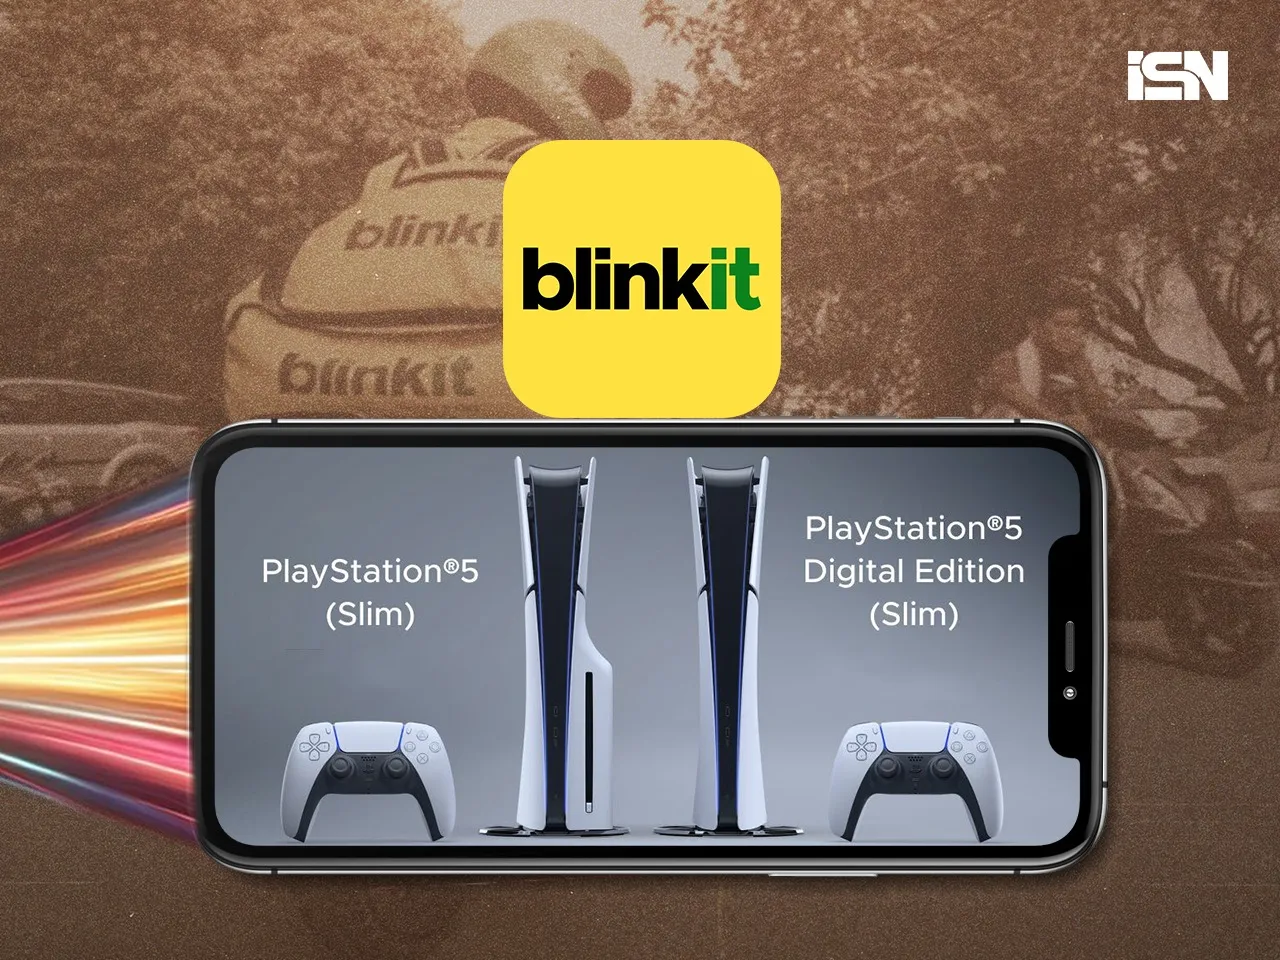 Blinkit to deliver new PS5 Slim in 10 minutes